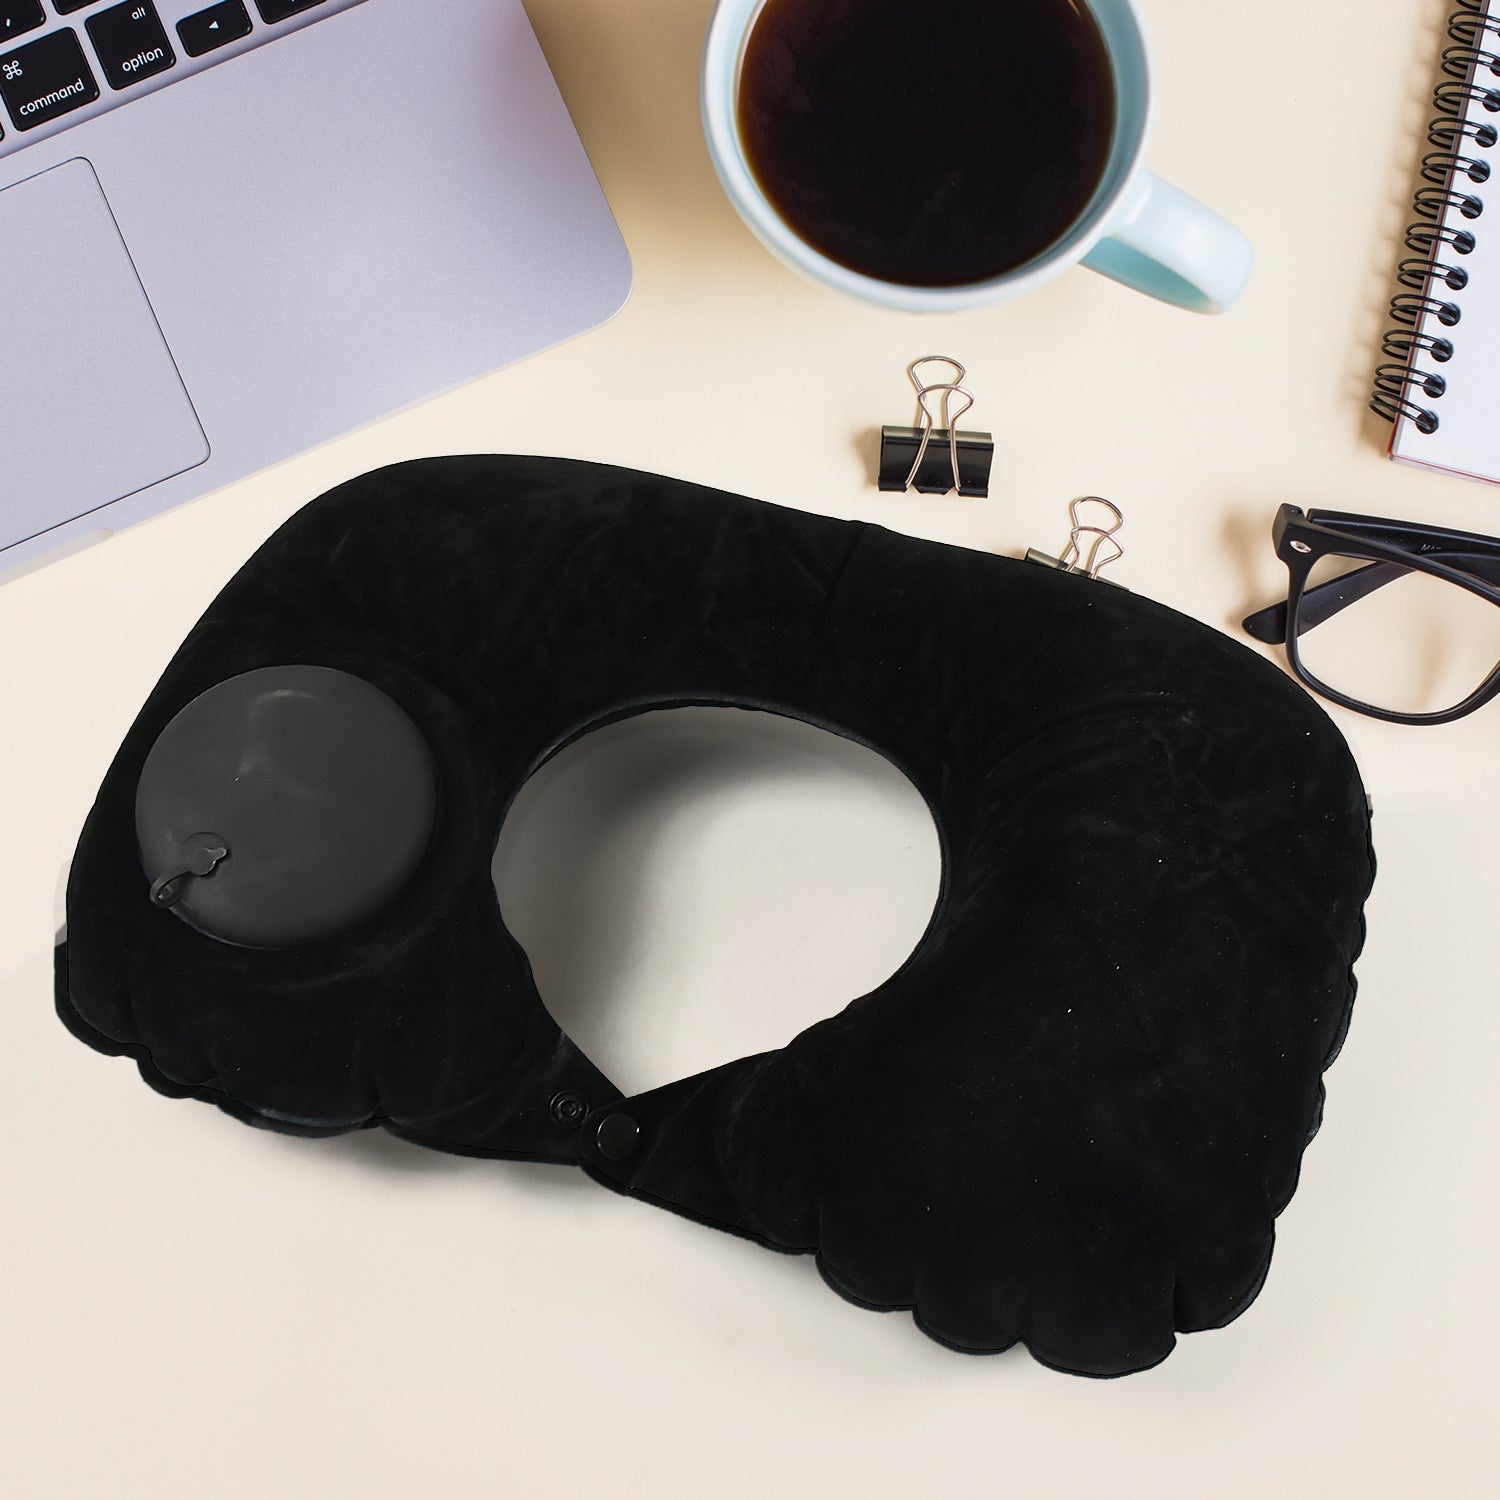 8512 3 in 1 Comfortable Travel Sleeping Kit, Neck Pillow, Eye Mask & Ear Plug Set Inflatable Plane Sleeping Pillow Head Neck Support Pillows for Travel Airplane Office, Black